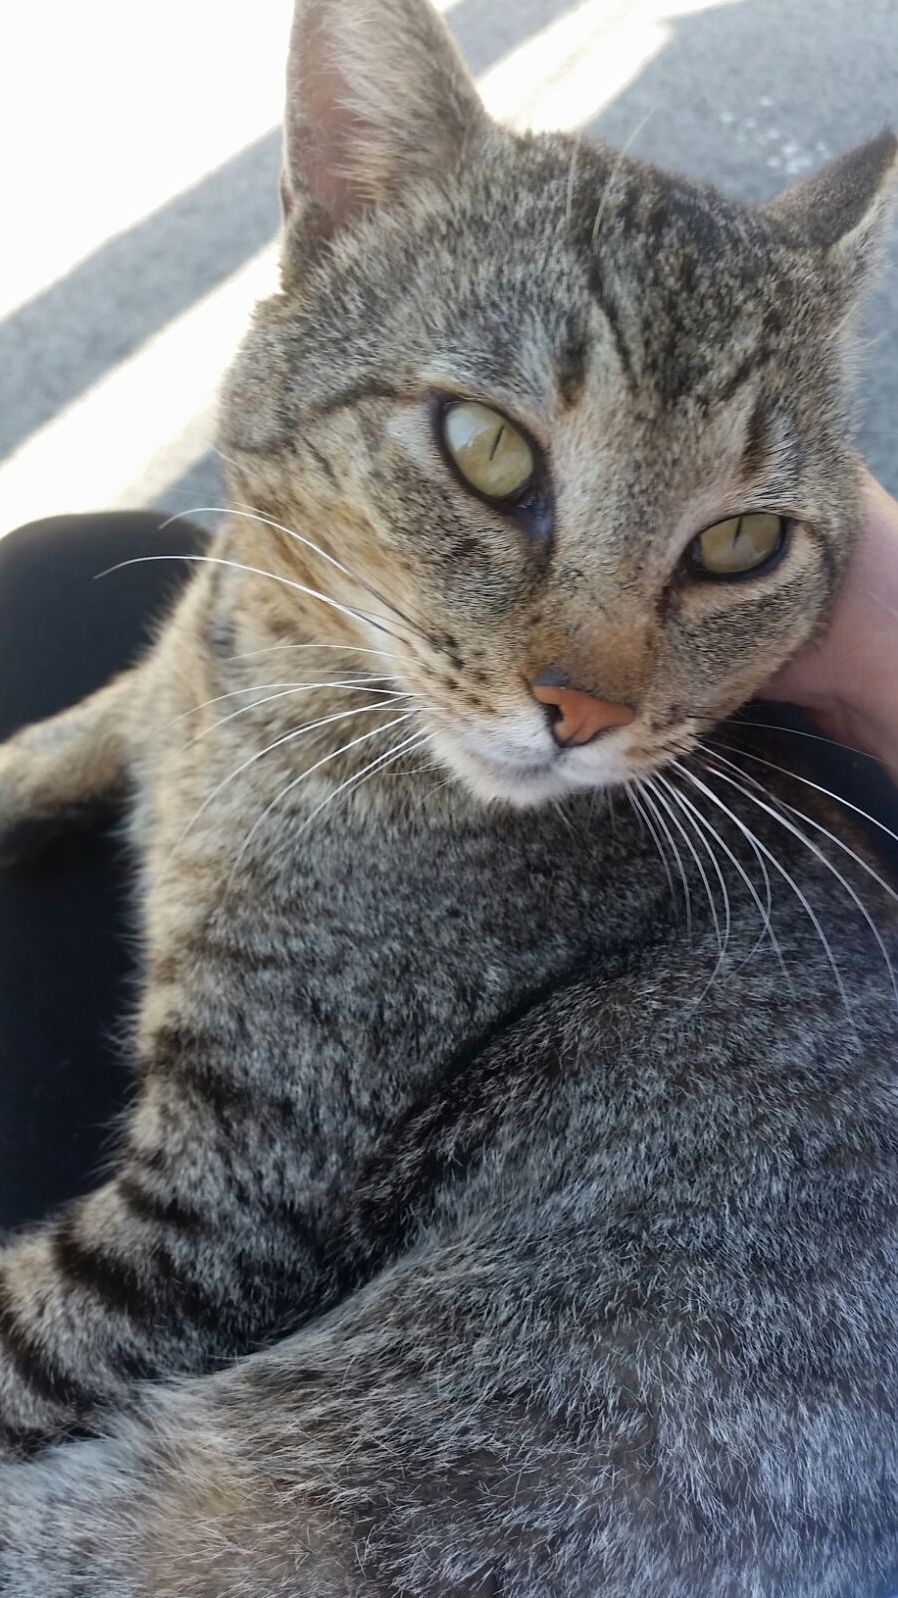 My friend was waiting for a bus and this lovely cat jumped up to her lap.